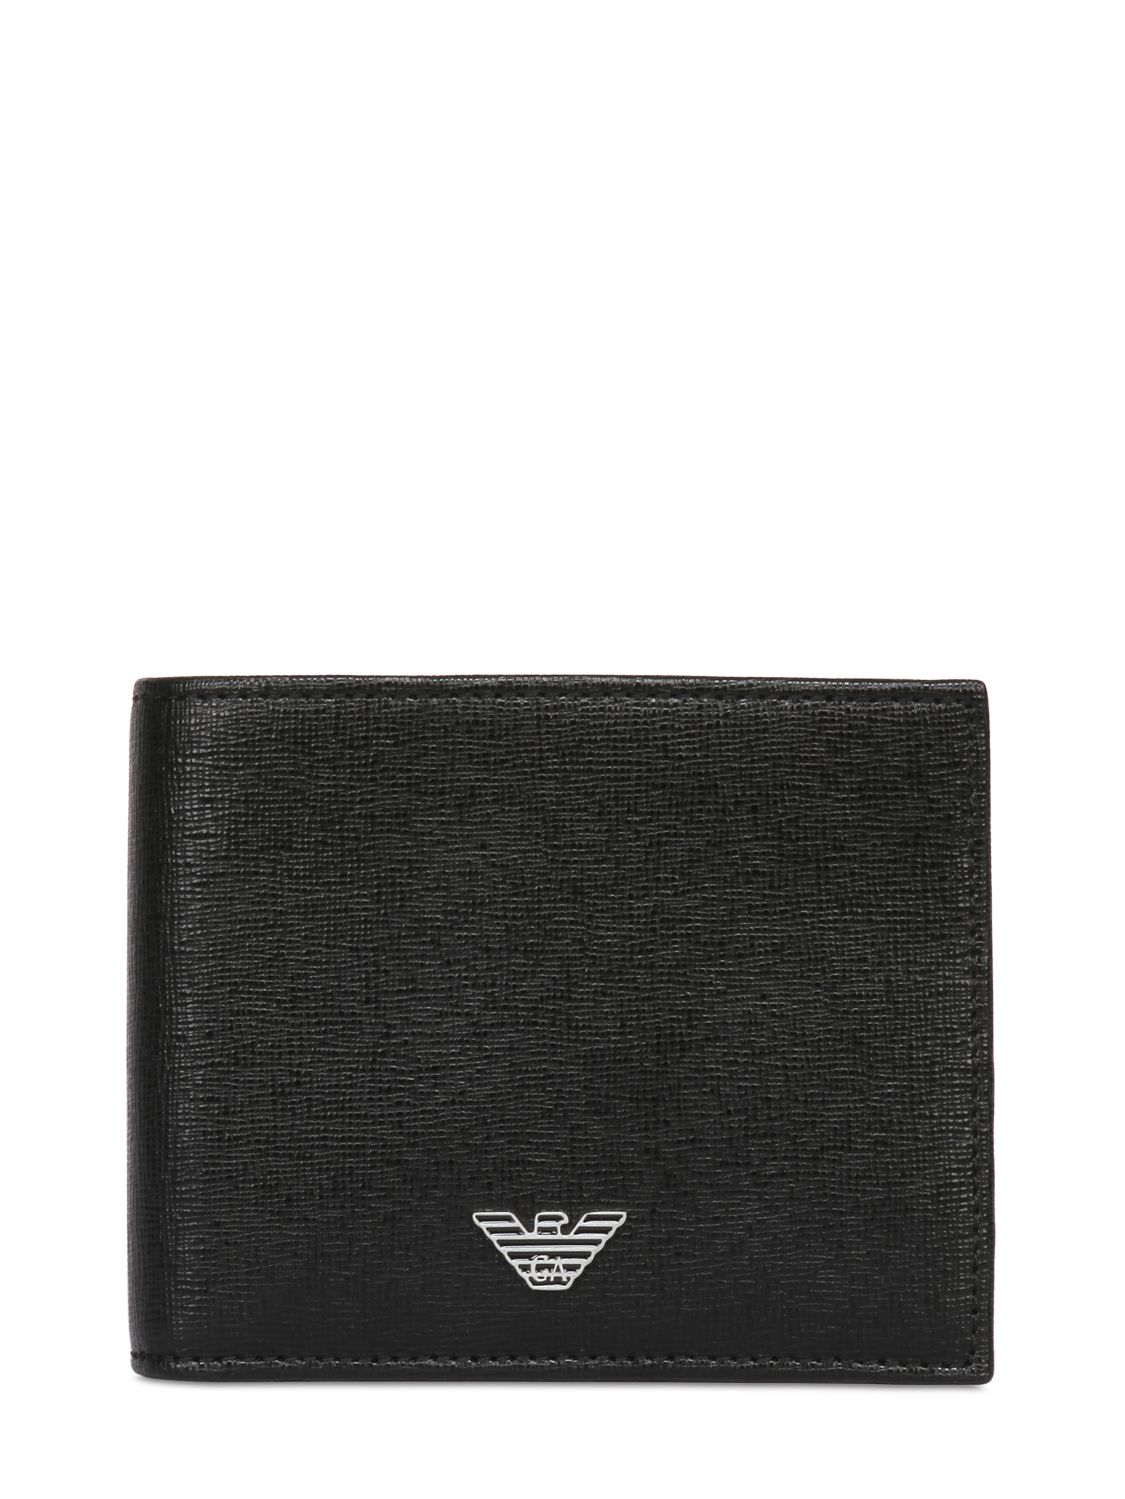 Lyst - Emporio Armani Embossed Leather Classic Wallet in Black for Men